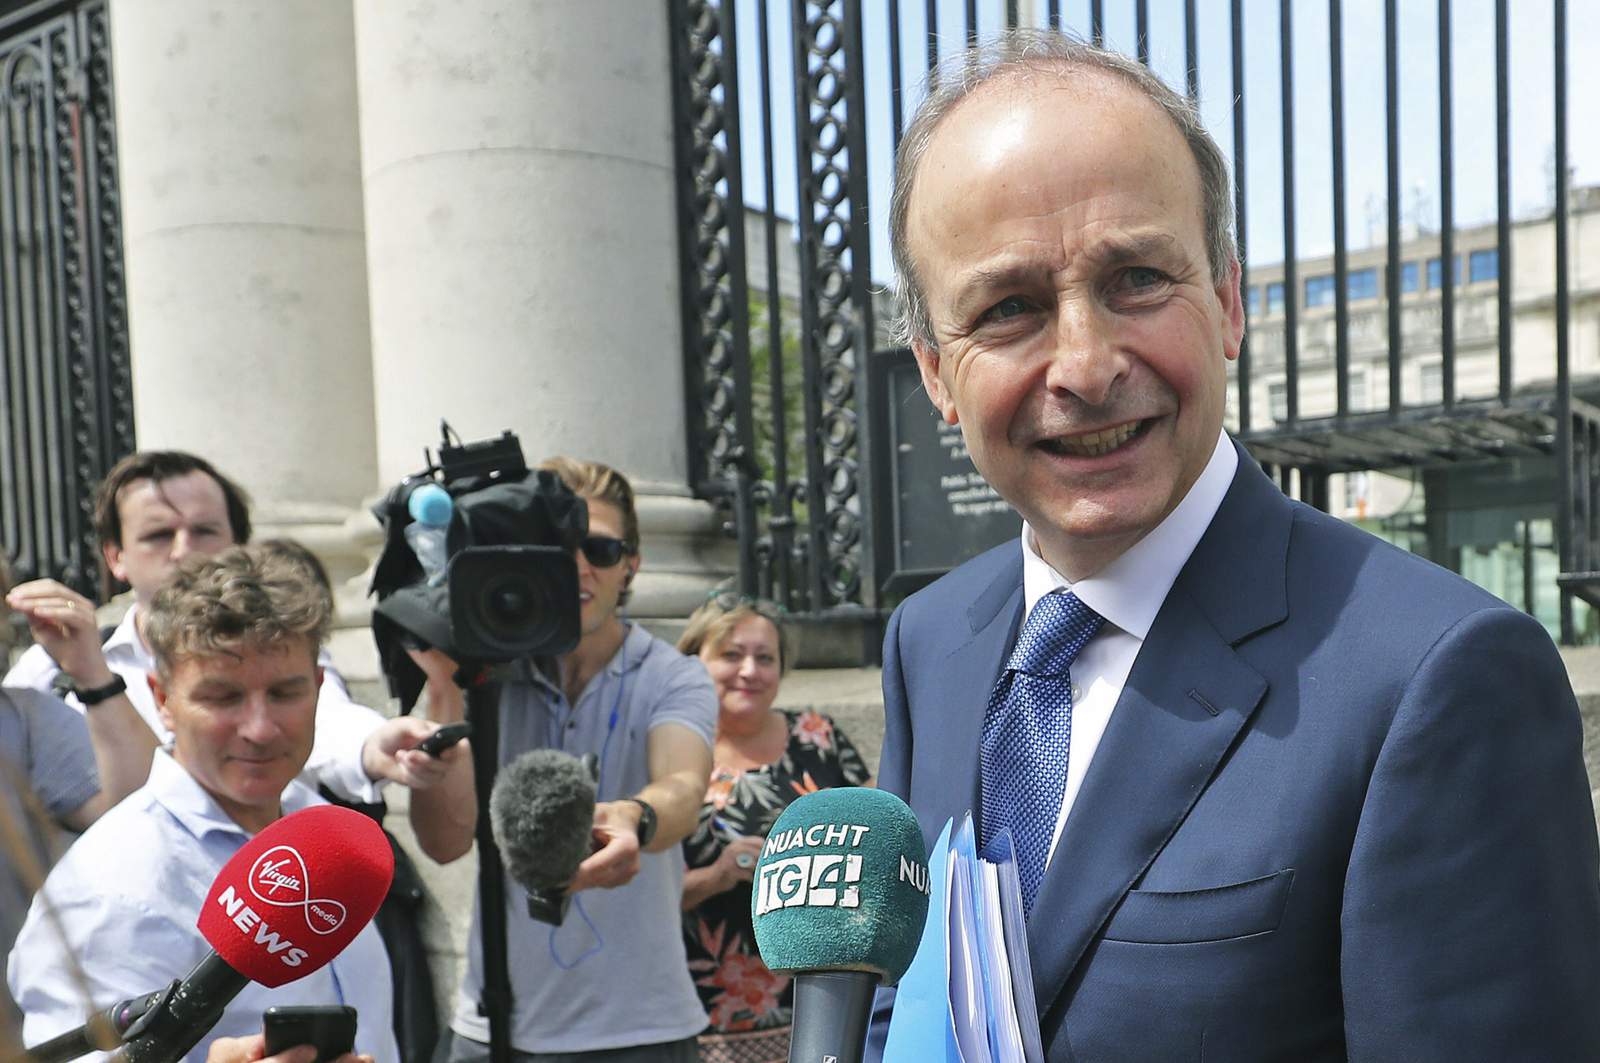 Rival Irish parties strike deal to form coalition government